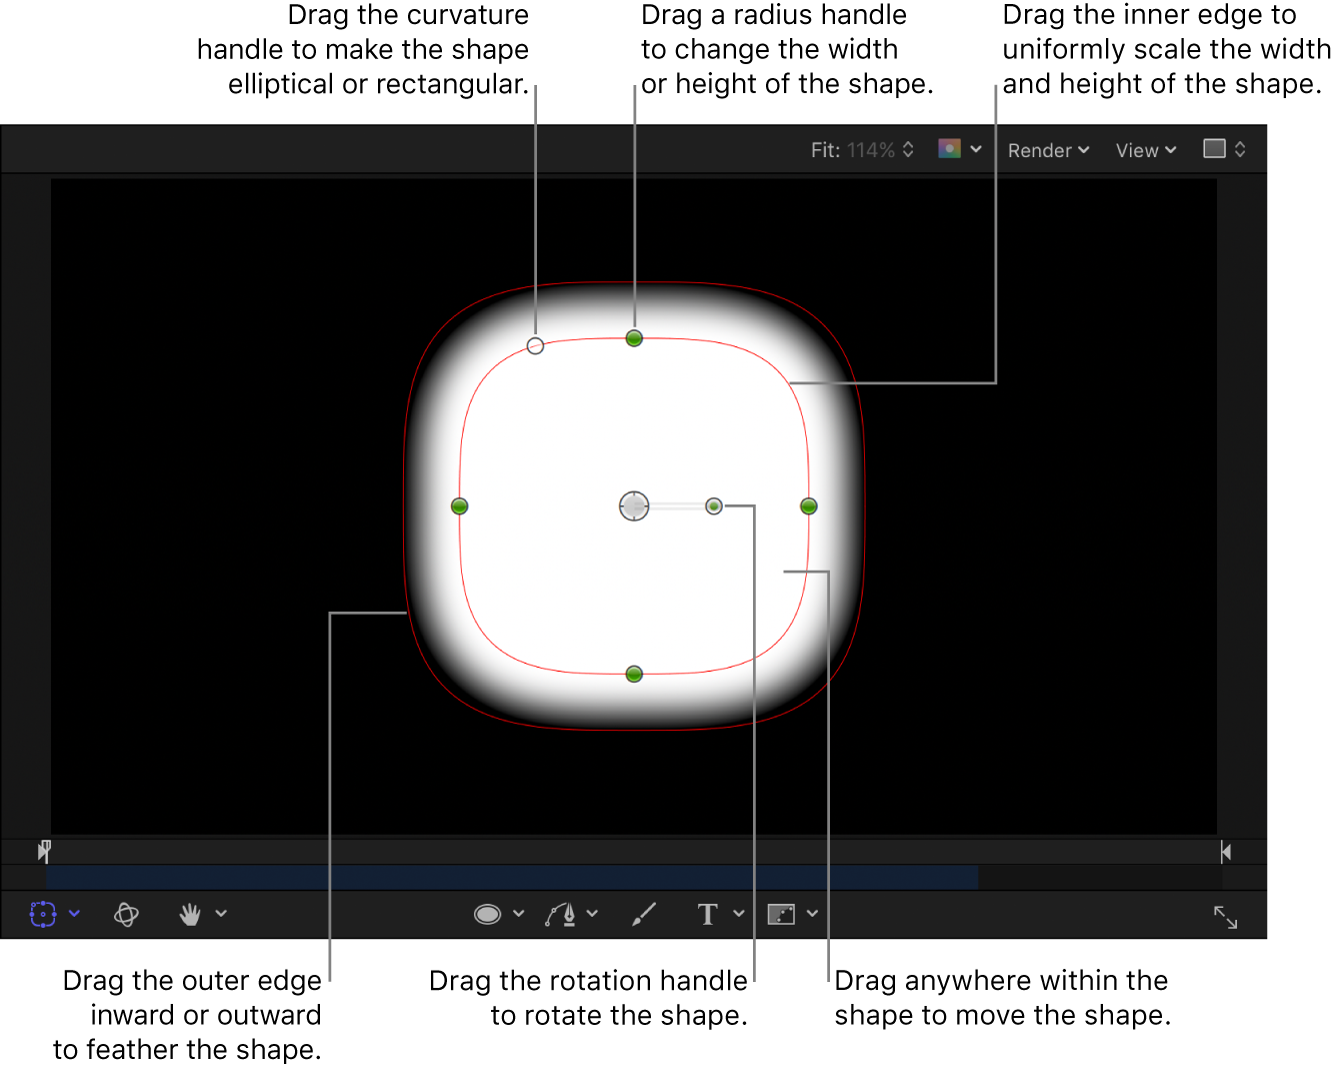 Onscreen controls to scale, feather, adjust curvature, and rotate a simple shape